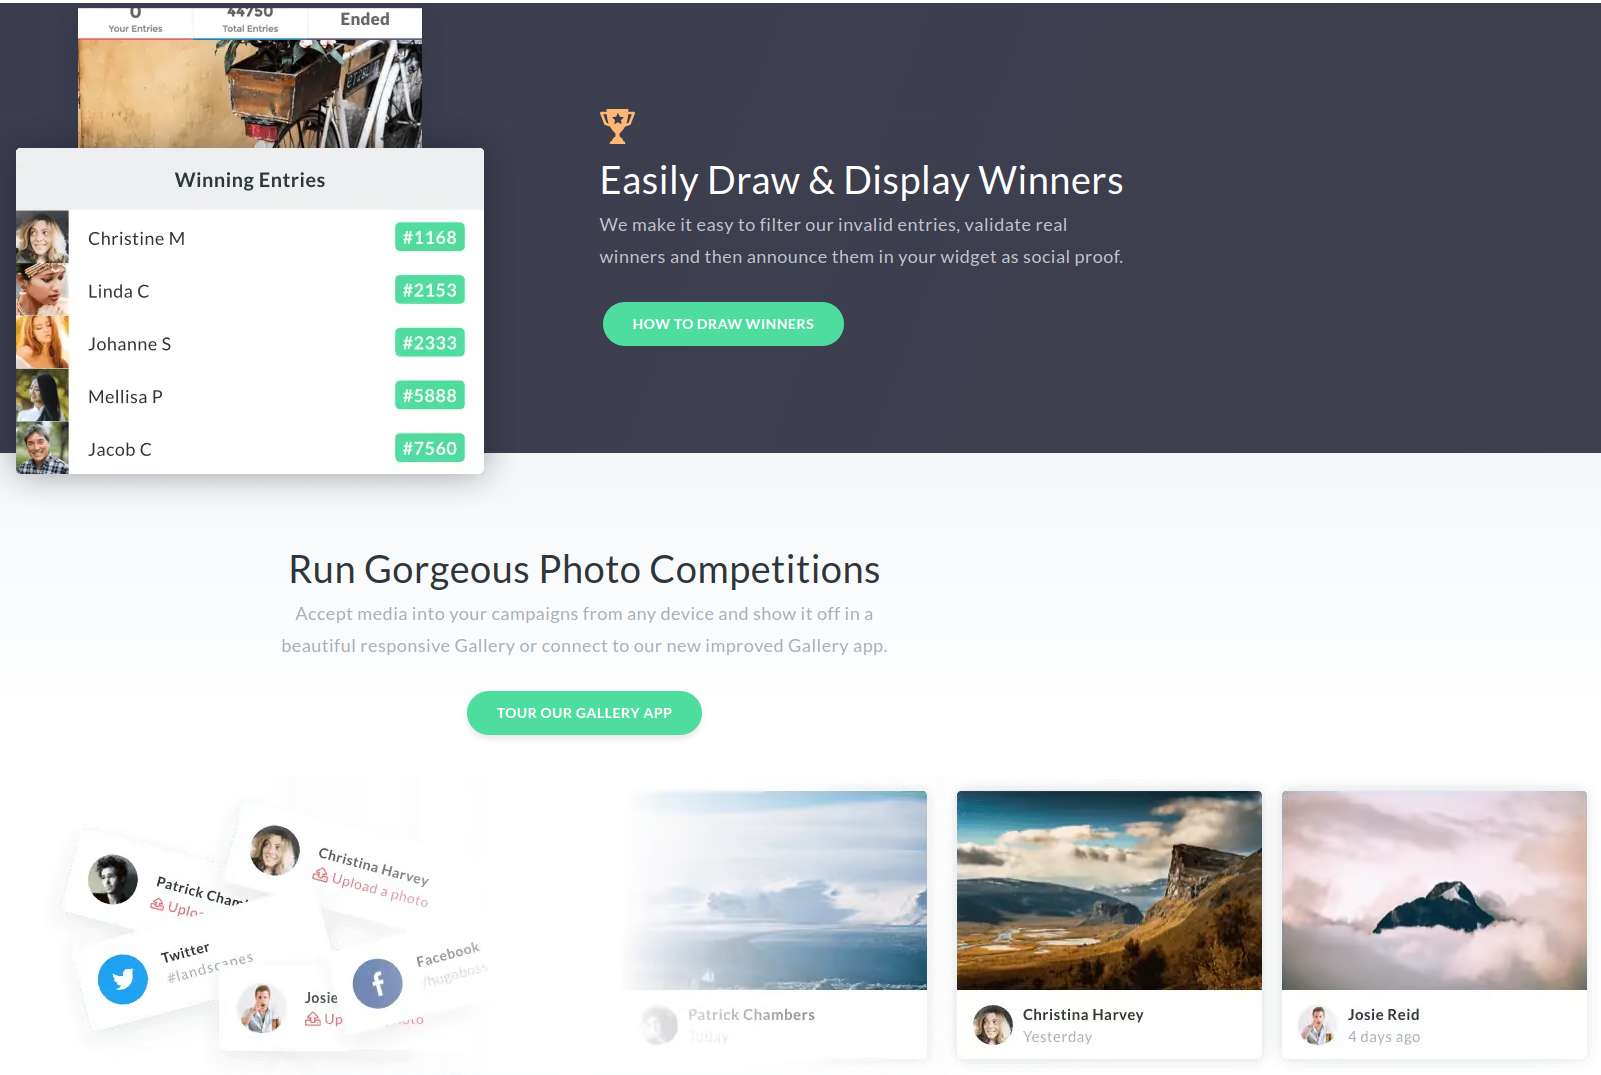 Platform for running contests, giveaways & promotional campaigns Gleam.io